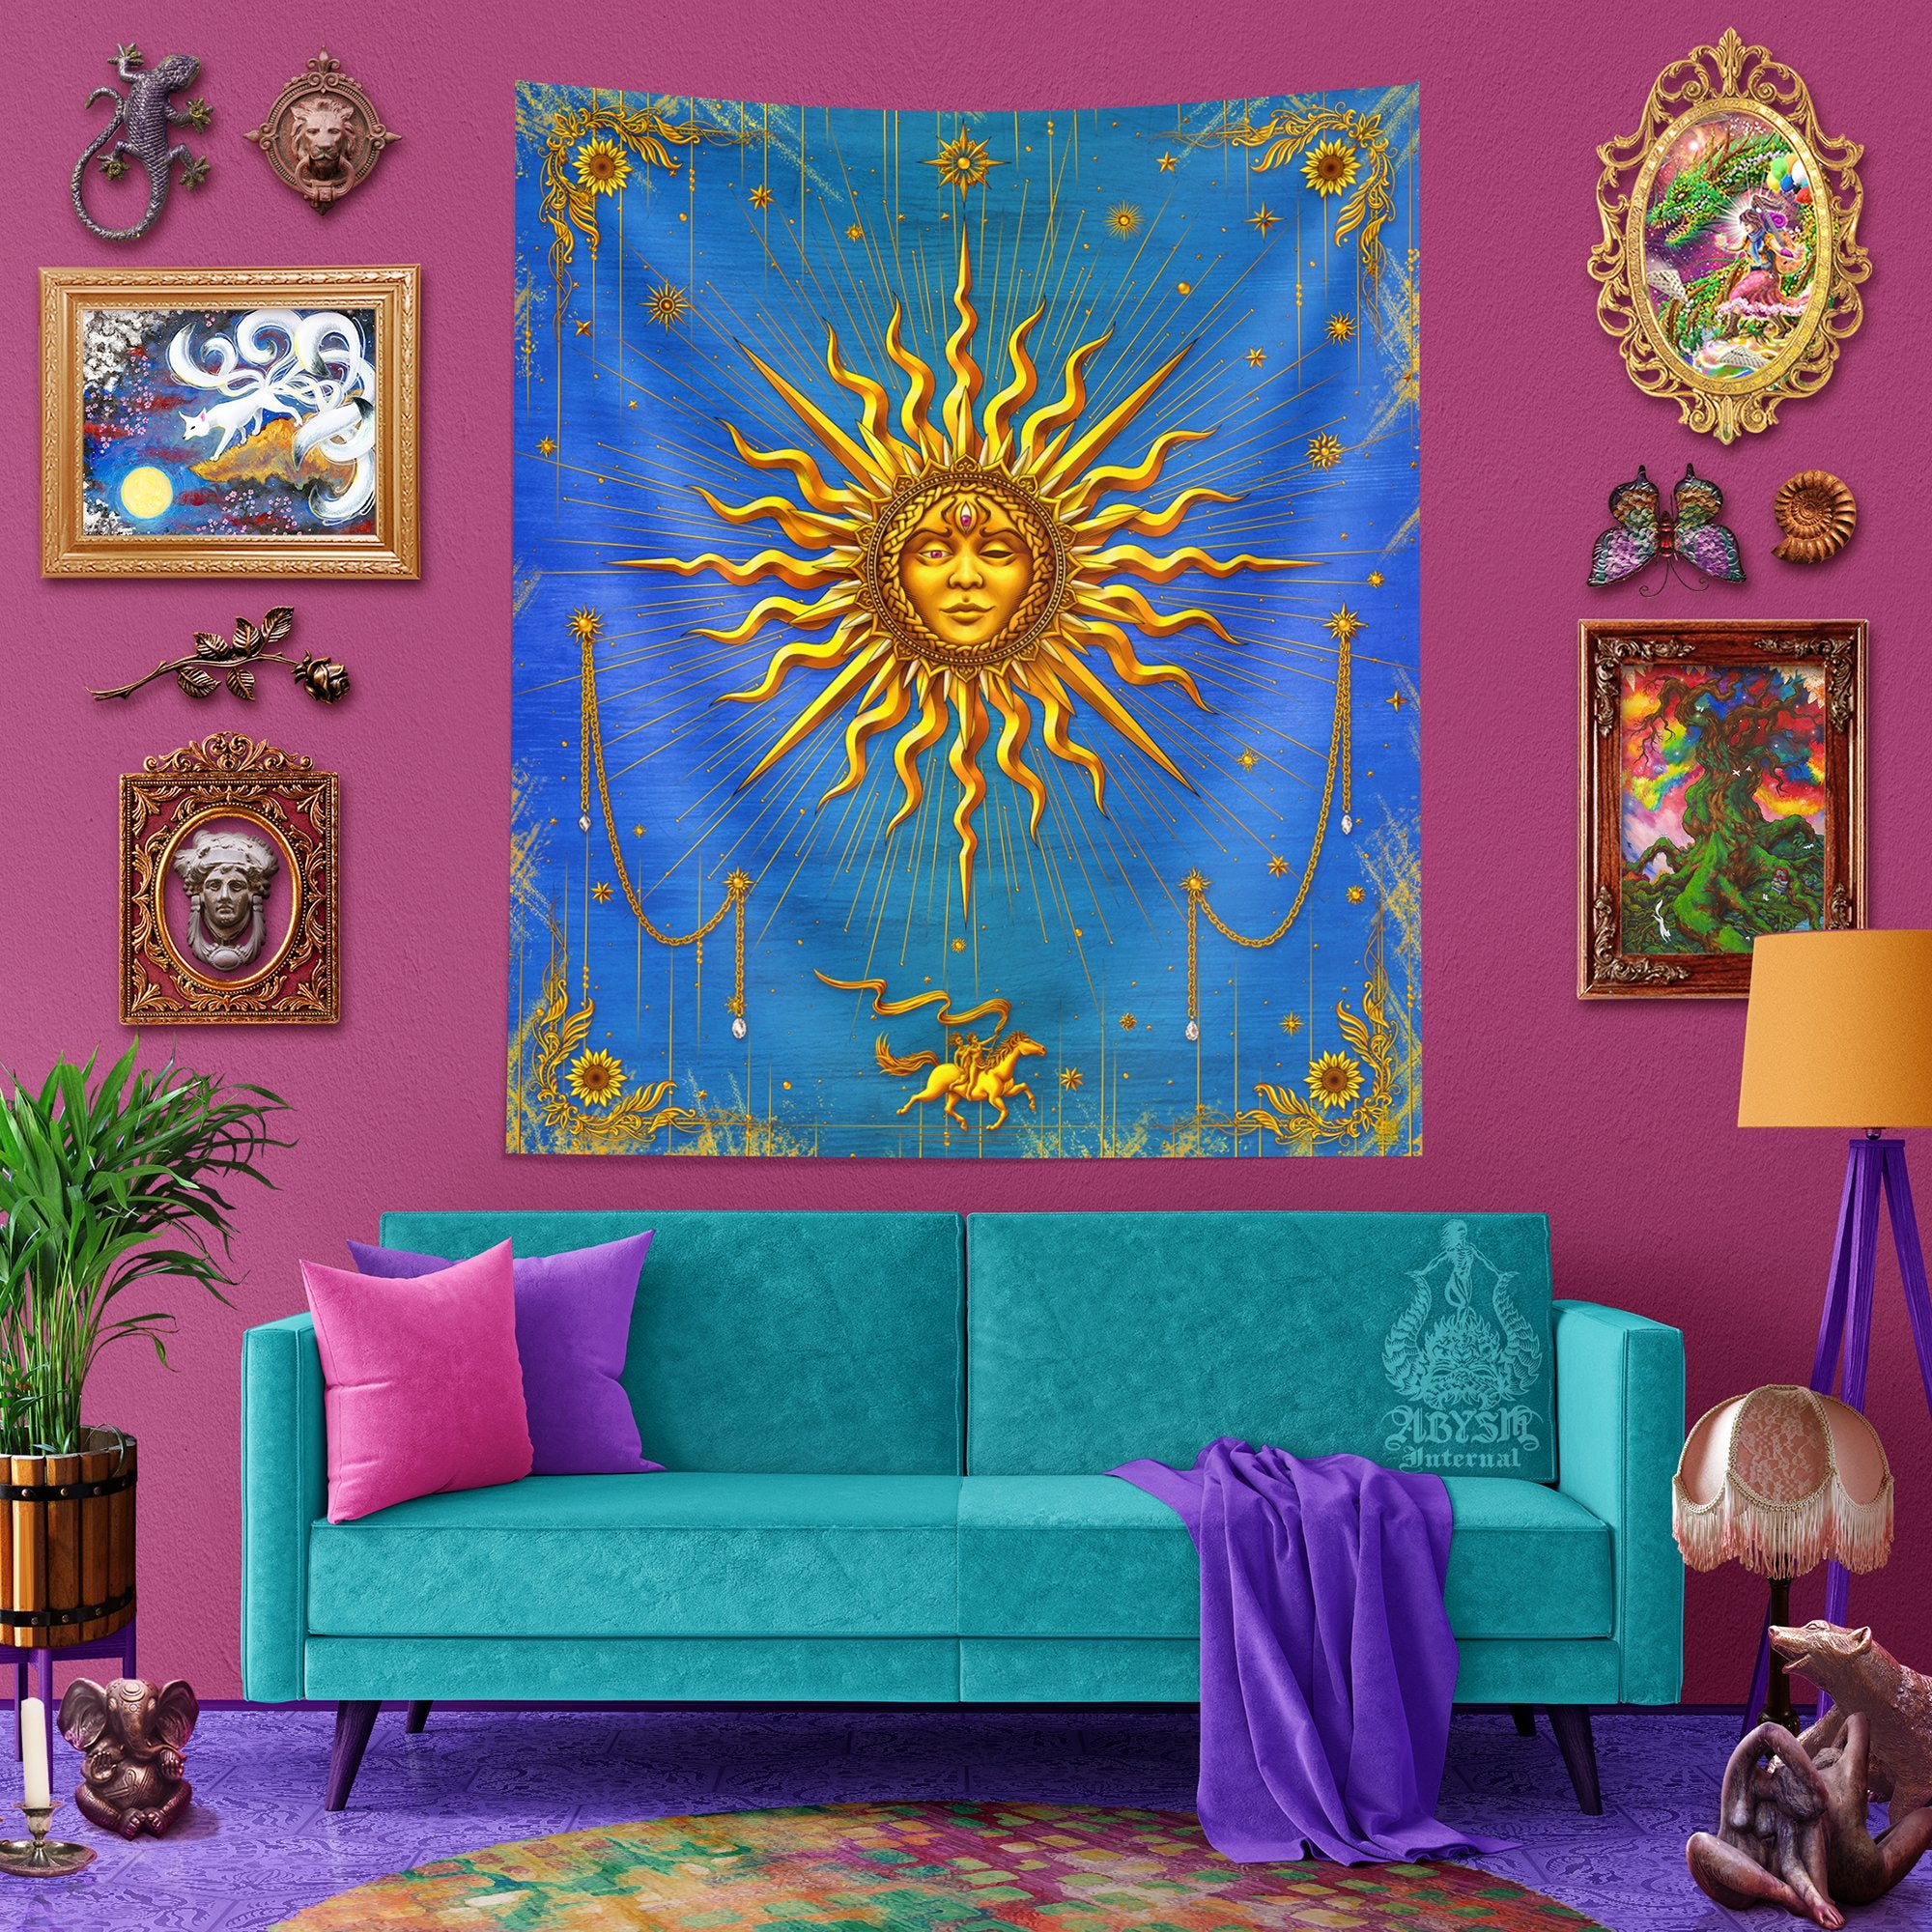 Gold Sun Tapestry, Tarot Card Arcana Wall Hanging, Magic and Esoteric Art, Boho and Indie Home Decor, Vertical Print - 7 Colors - Abysm Internal